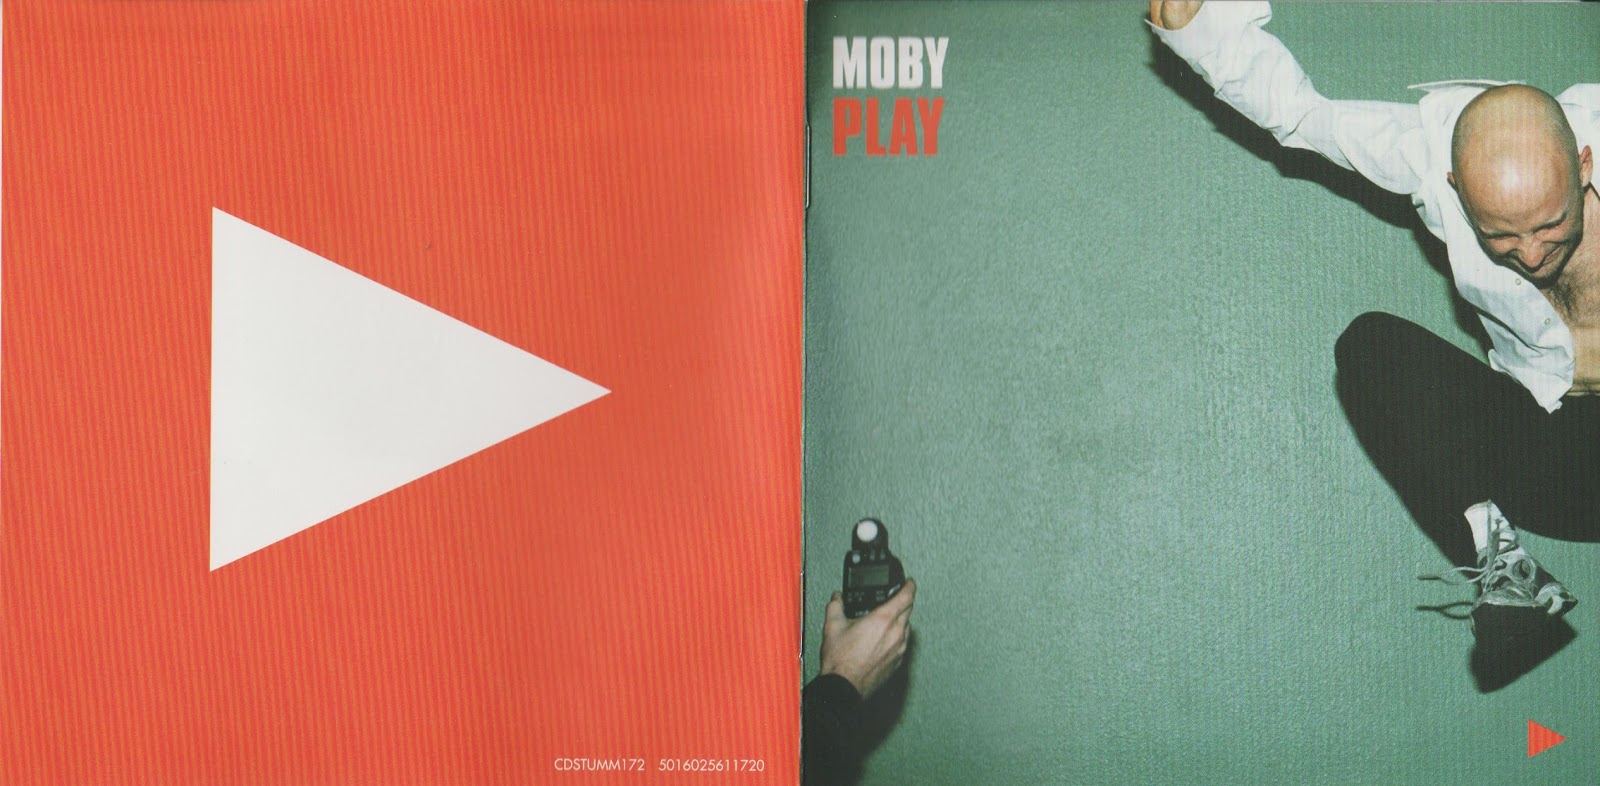 Moby play. Moby 2001. Moby 1995. Moby 2005. Moby обложка.